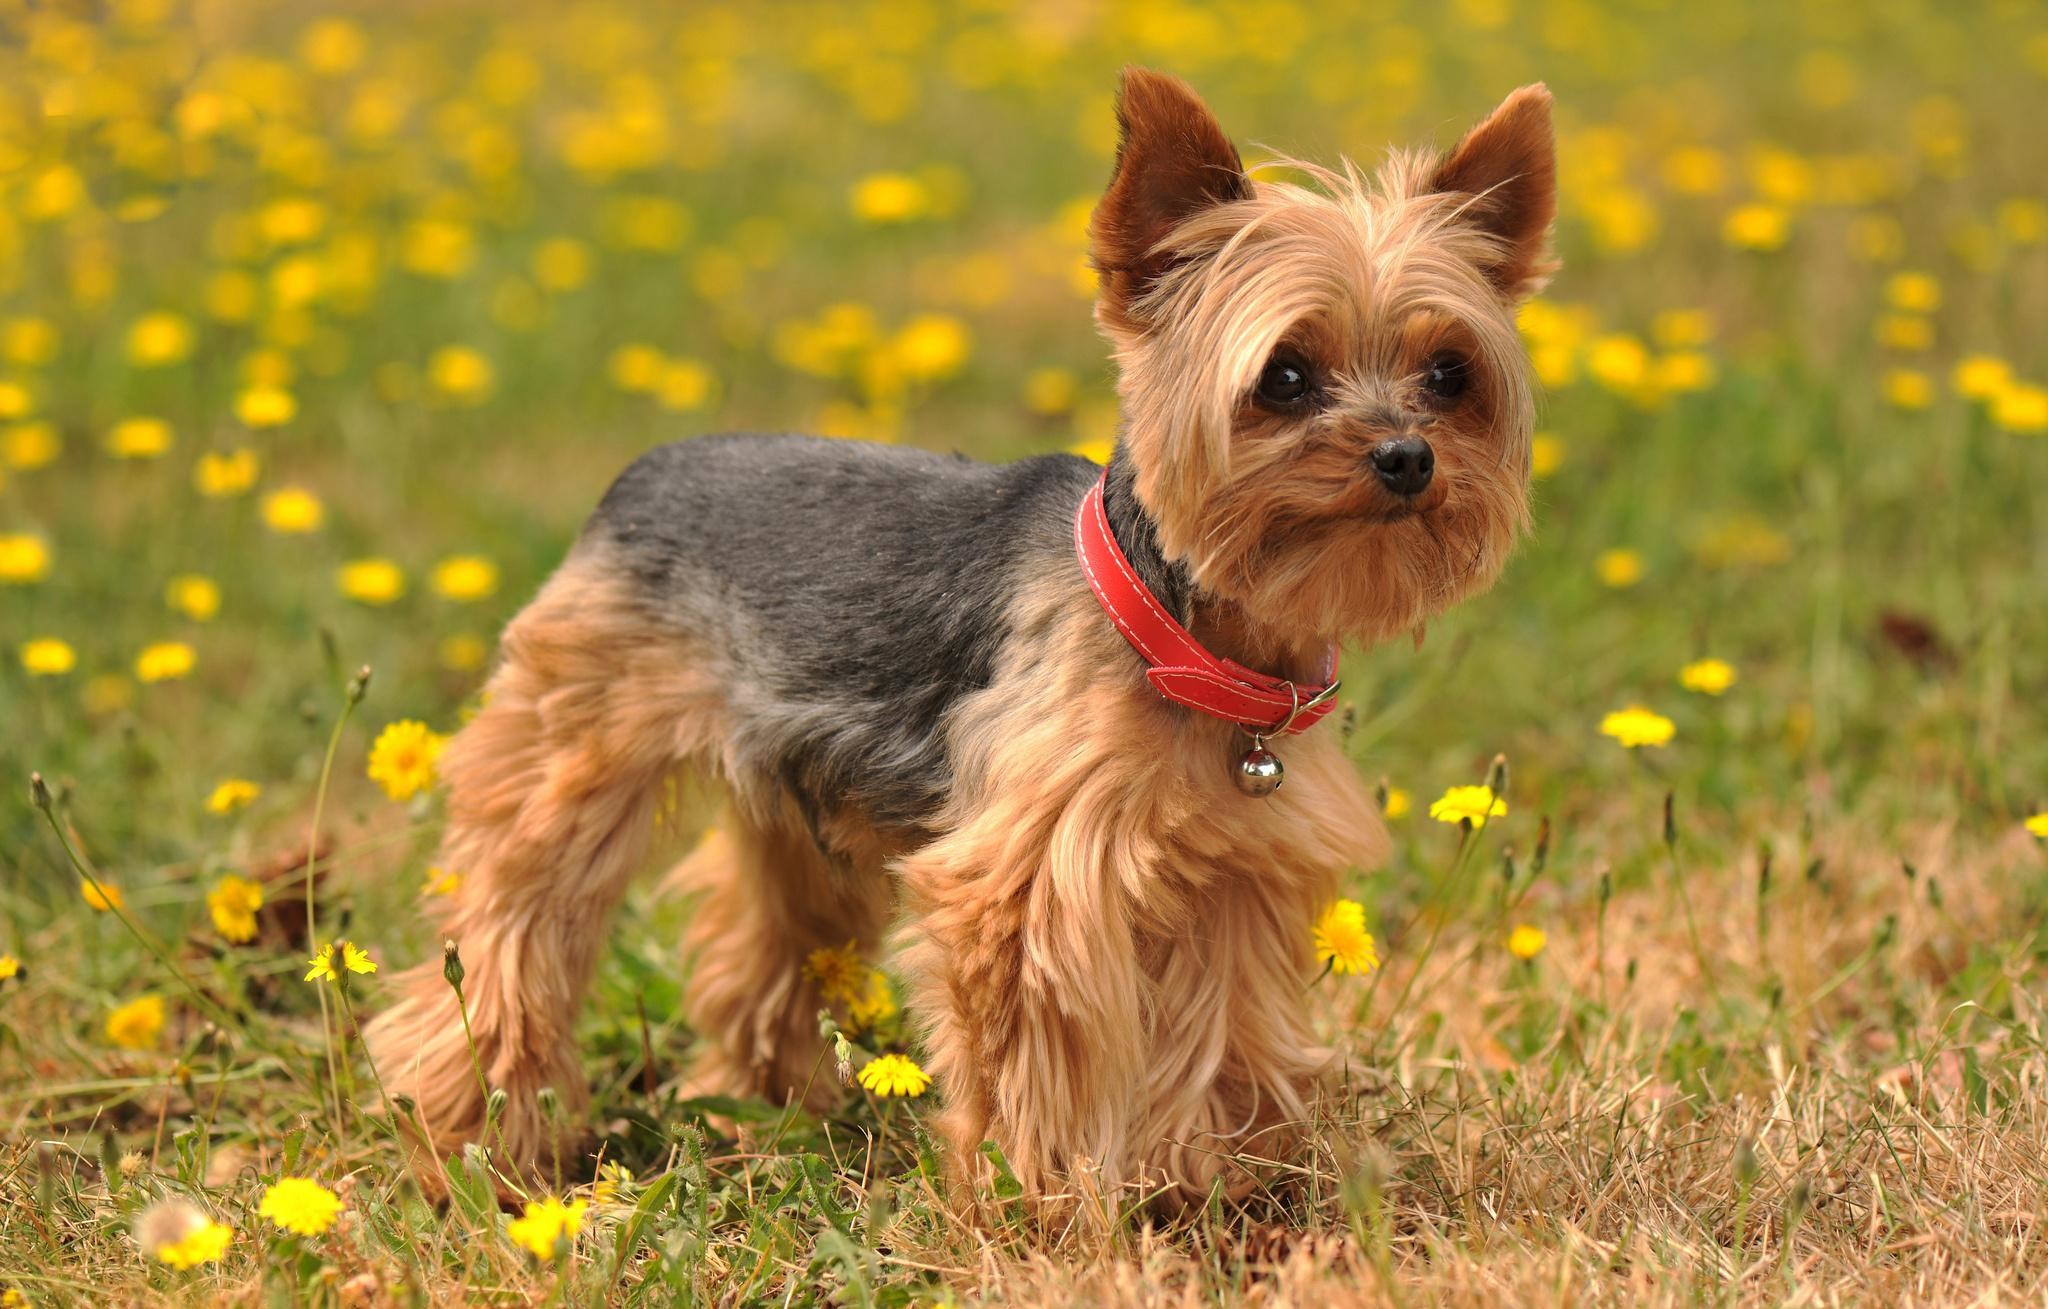 Animals Yorkshire Terrier Dog Images.Very Beautiful Yorkshire Terrier Dog Photos.Yorkshire Terrier Dog Pics Background Wallpapers Download